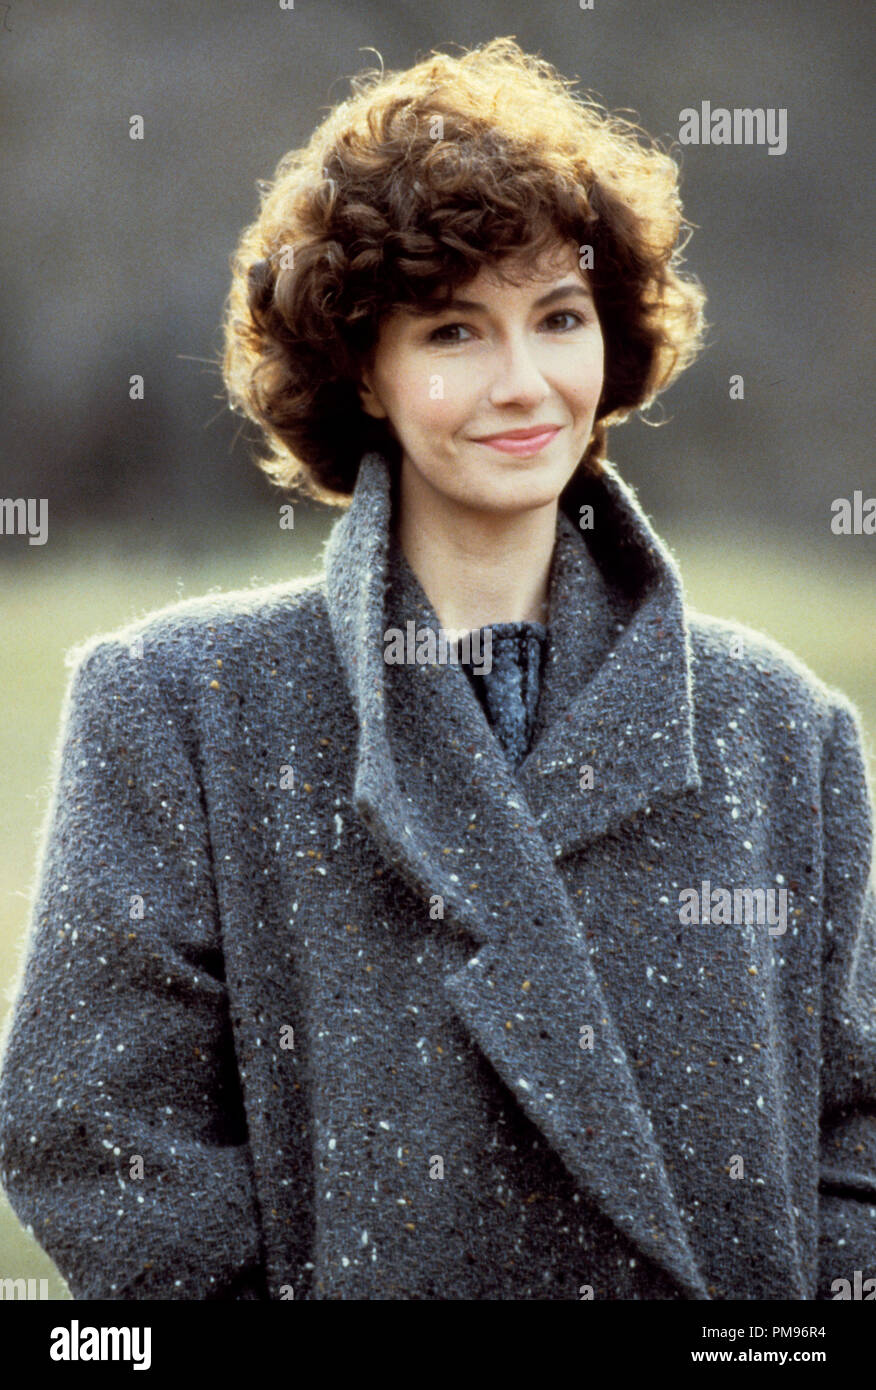 Studio Publicity Still from 'One Magic Christmas' Mary Steenburgen © 1985 Walt Disney Pictures Photo Credit: Guy Webster  All Rights Reserved   File Reference # 31703184THA  For Editorial Use Only Stock Photo